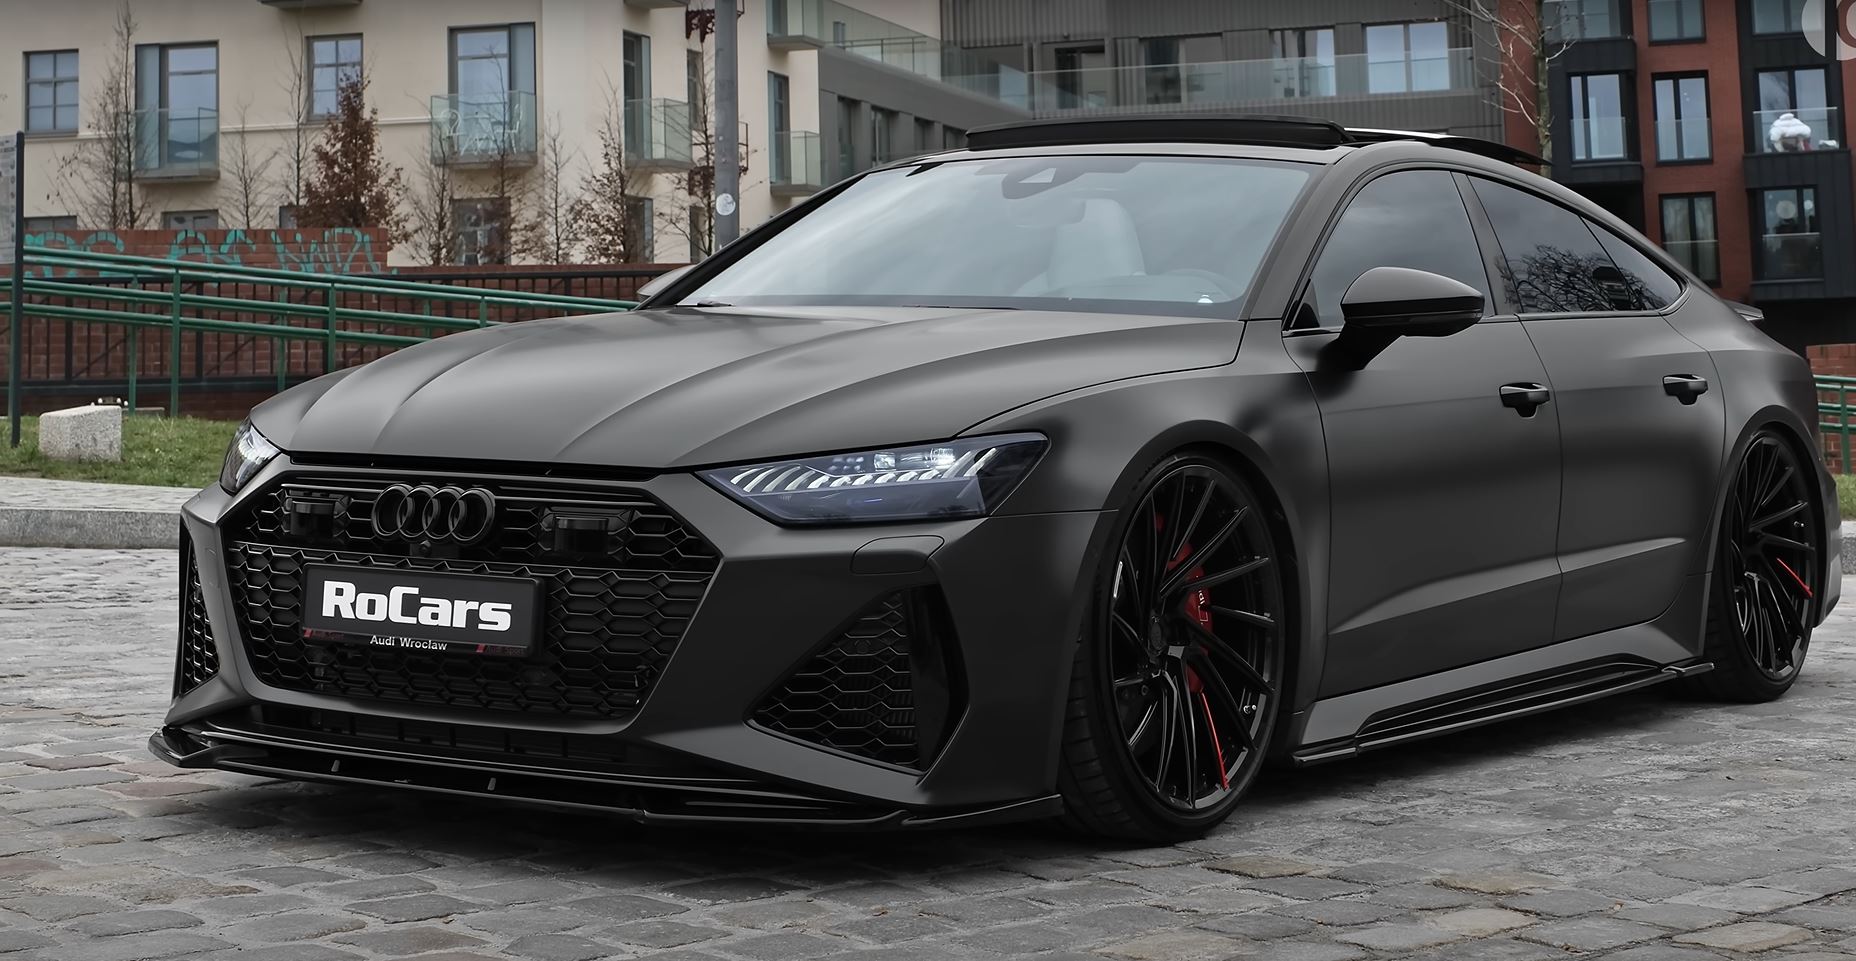 SpectacularLooking 2023 Audi RS 7 Reveals Its Dark Side in This In